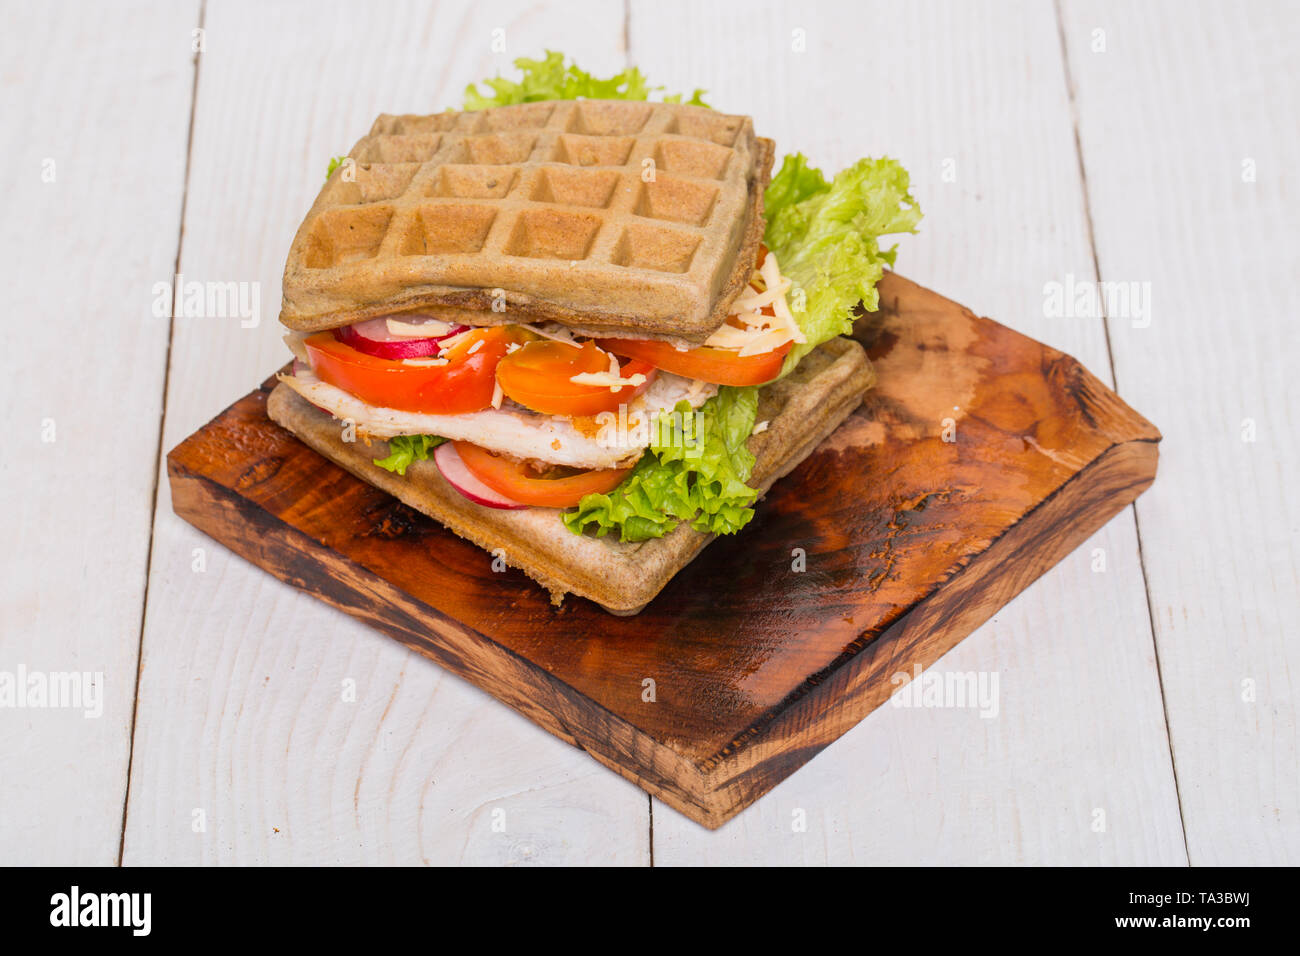 Wafer dish, breakfast, lunch Stock Photo